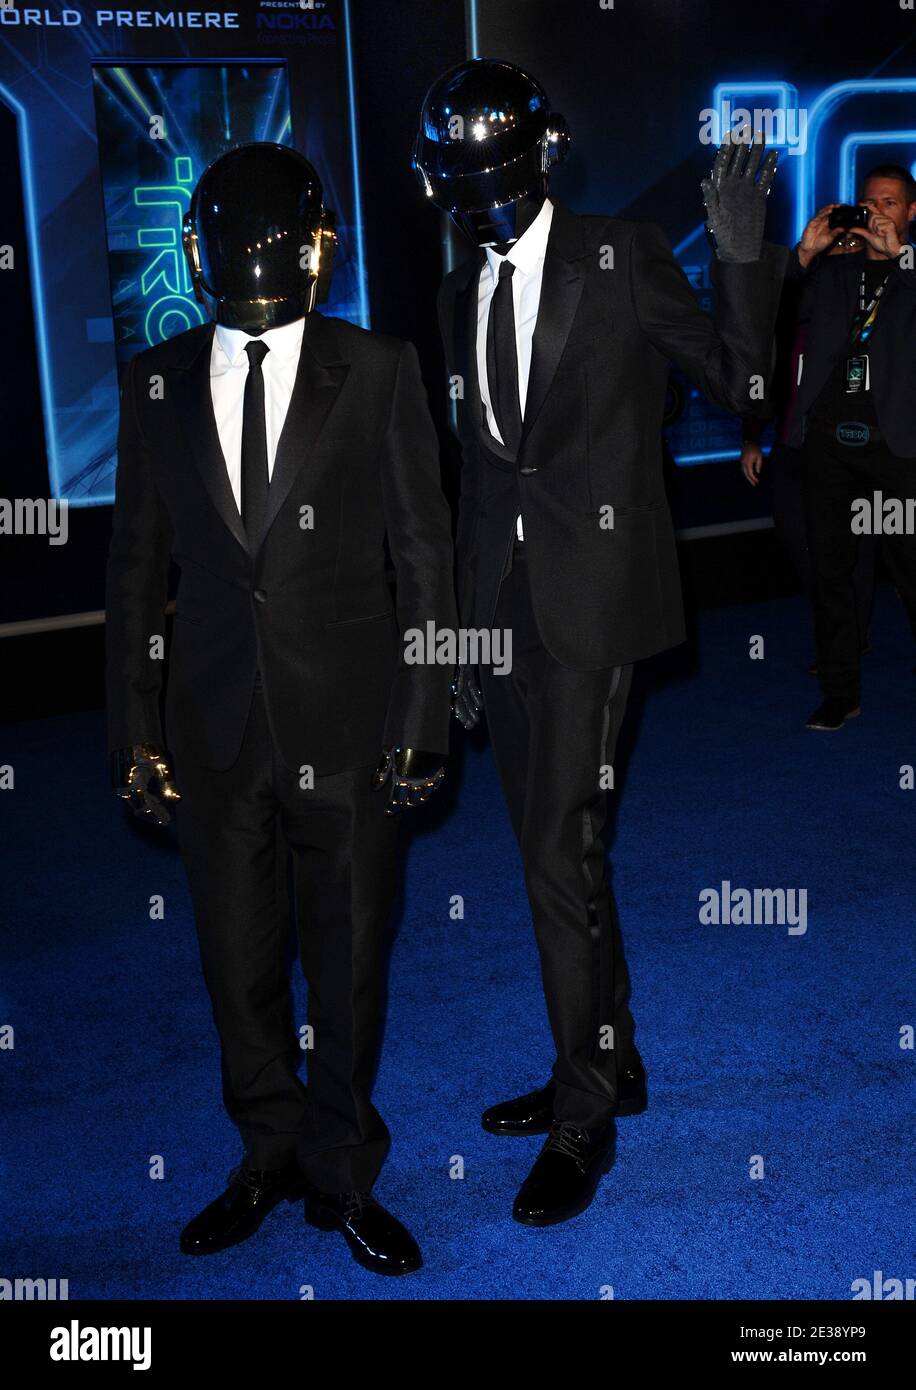 Musicians Thomas Bangalter and Guy-Manuel De Homem-Christo of Daft Punk attend the world premiere of Walt Disney Pictures 'Tron: Legacy' at El Capitan Theatre in Los Angeles, December 11, 2010. Photo by Lionel Hahn/ABACAPRESS.COM Stock Photo